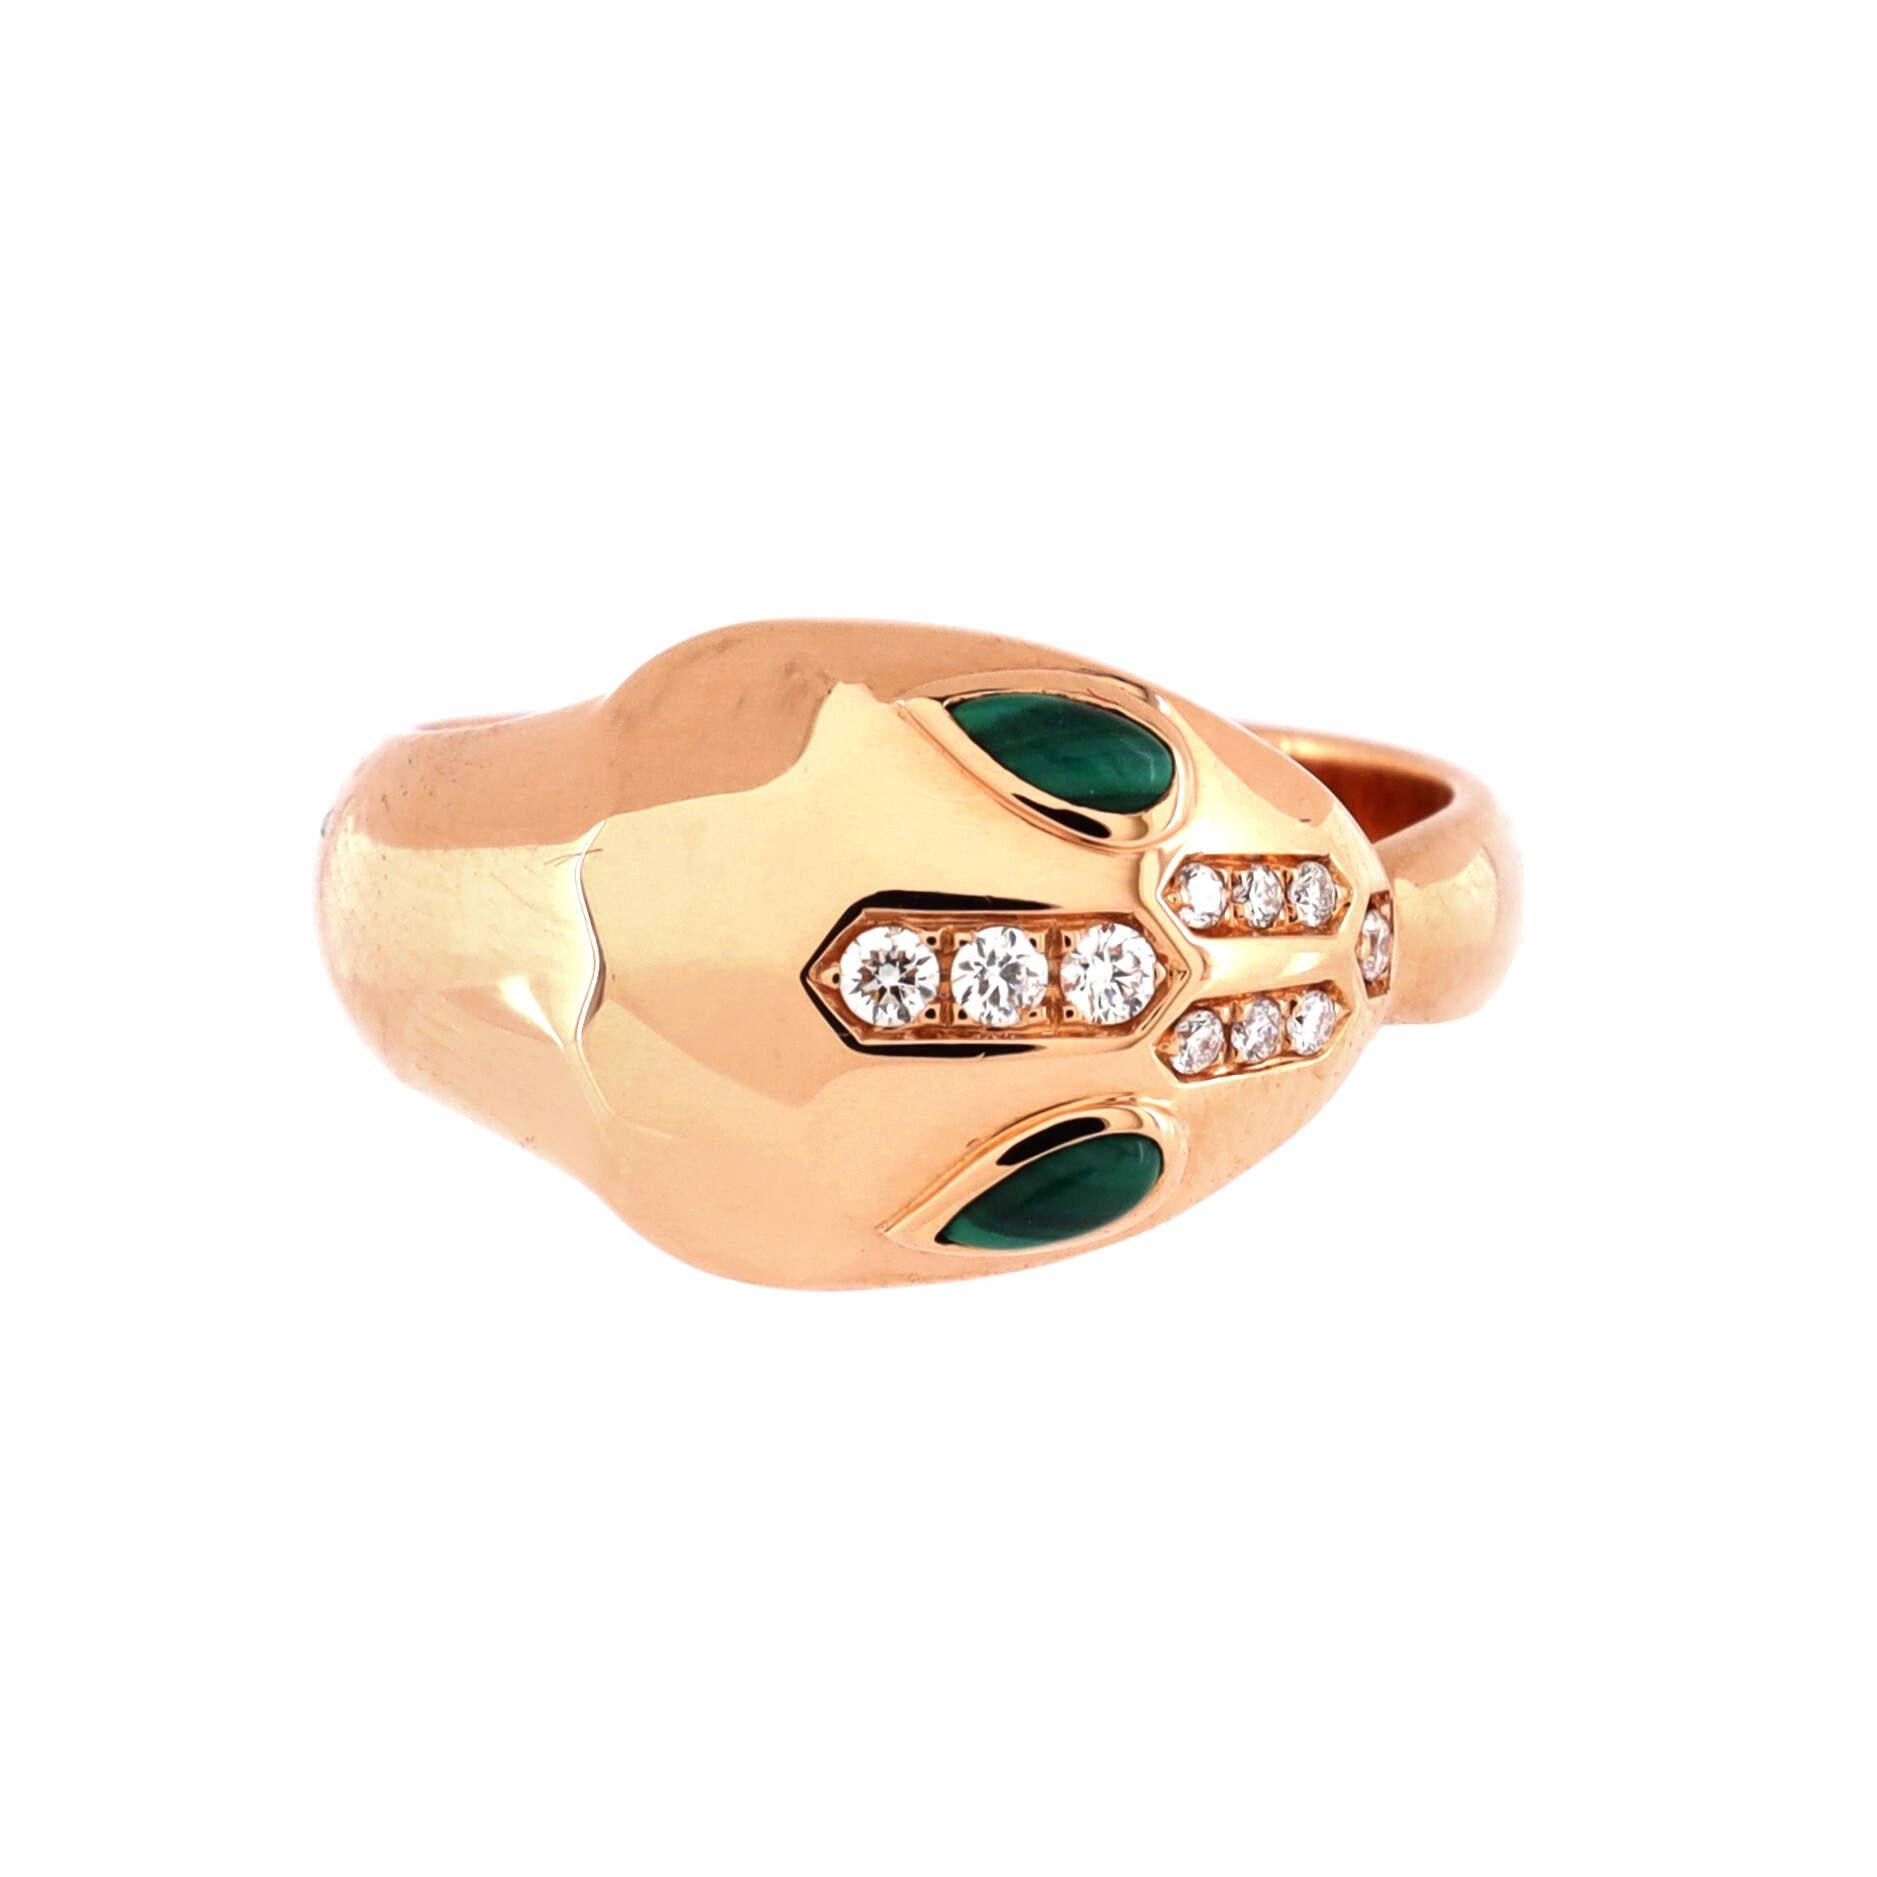 Condition: Great. Minor scratches throughout.
Accessories: No Accessories
Measurements: Size: 7, Width: 4.60 mm
Designer: Bvlgari
Model: Serpenti Seduttori Ring 18K Rose Gold with Malachite and Pave Diamonds
Exterior Color: Rose Gold
Item Number: